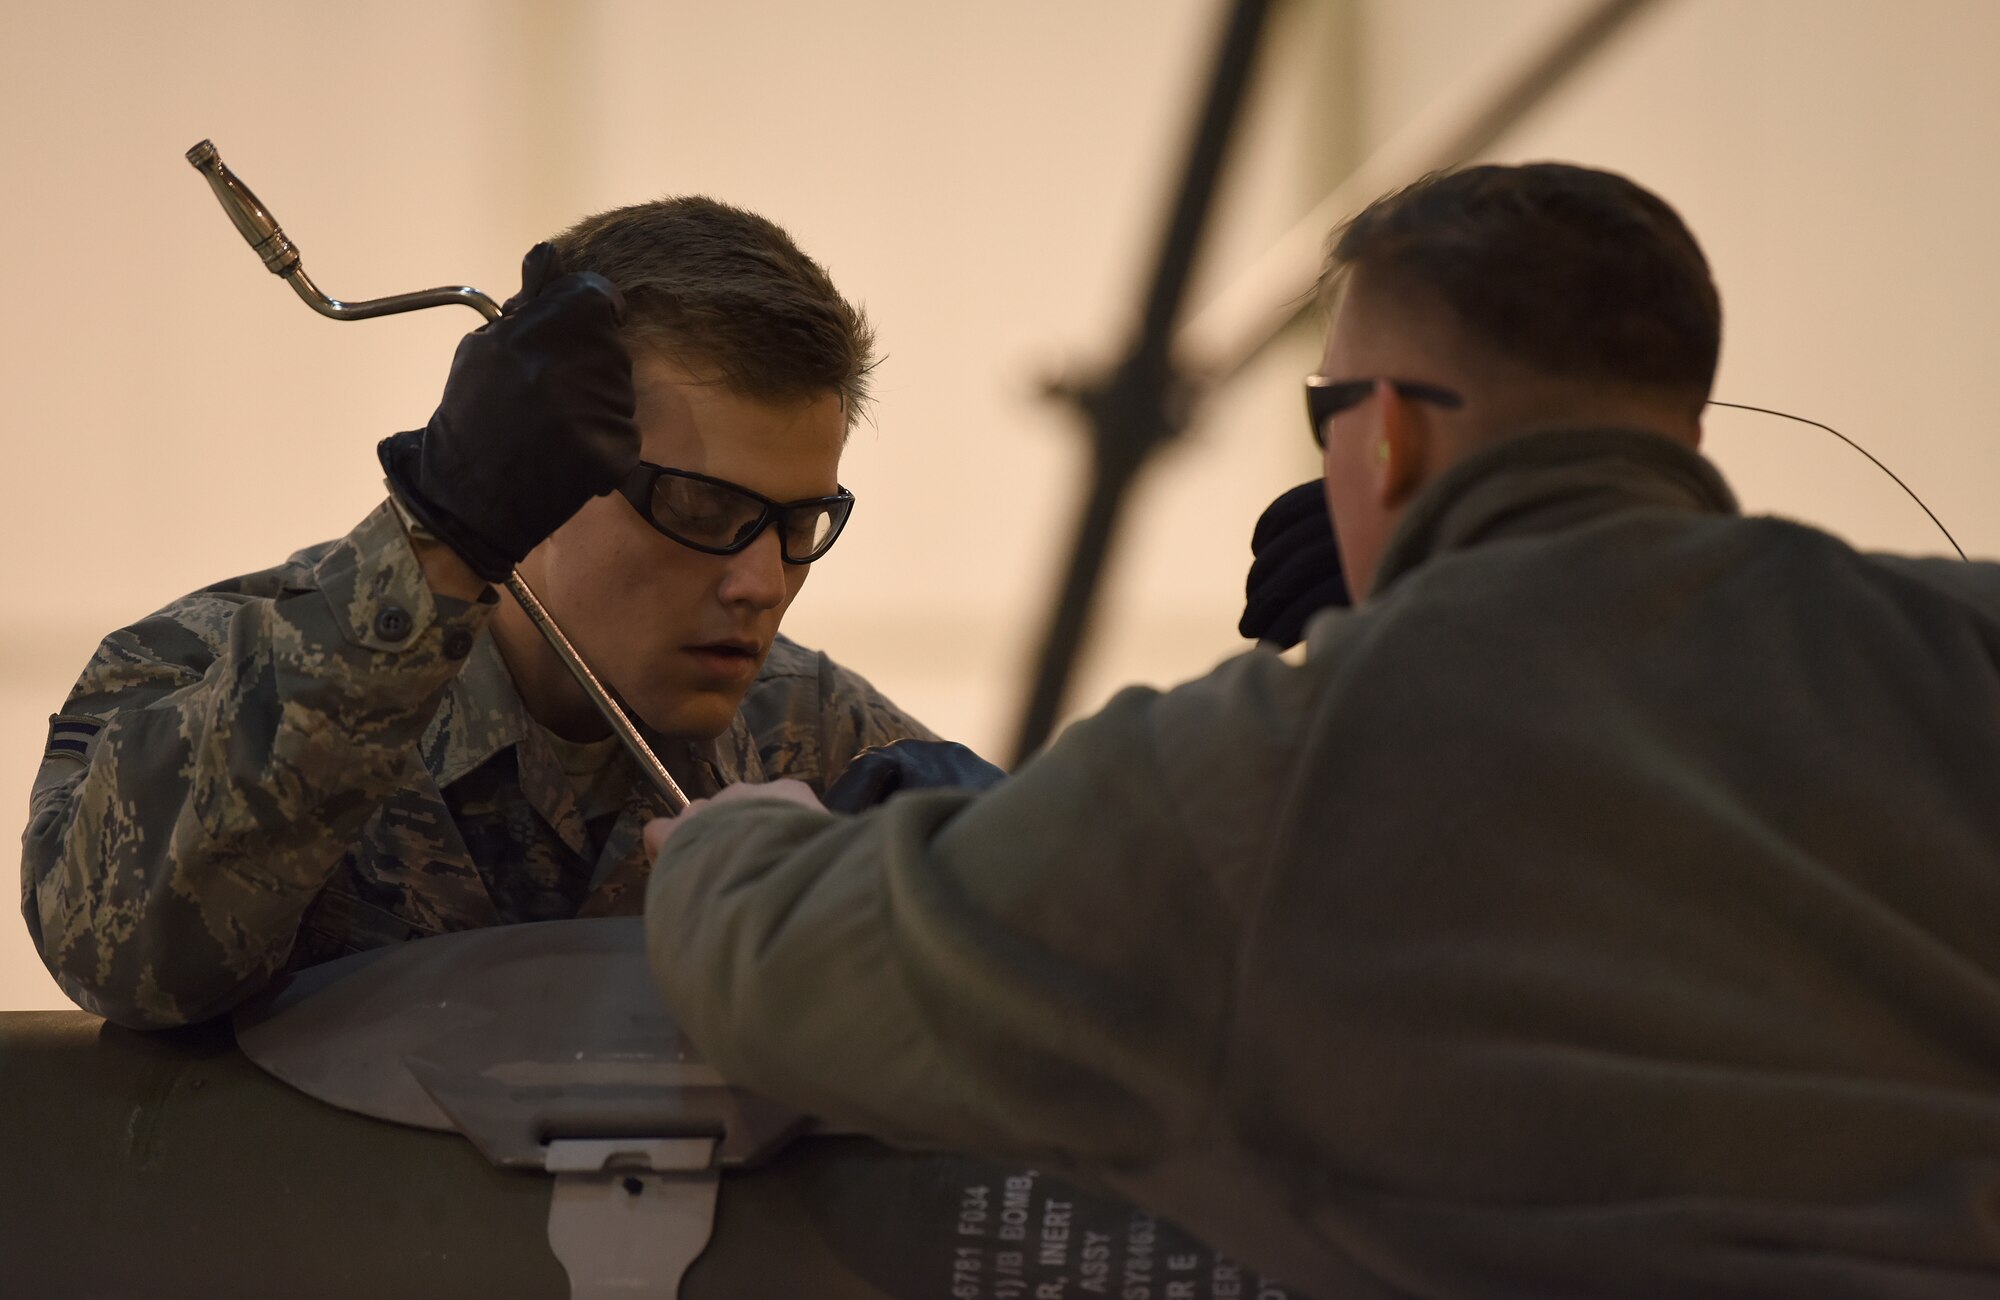 Airman 1st Class Cody Roach, 48th Munitions Squadron specialist, secures the hardback assembly on an inert ordnance at Royal Air Force Lakenheath, England, Jan. 23, 2019. Participants were hand selected by section noncommissioned officers in charge and shop chiefs to represent the squadron. (U.S. Air Force photo by Airman 1st Class Madeline Herzog)